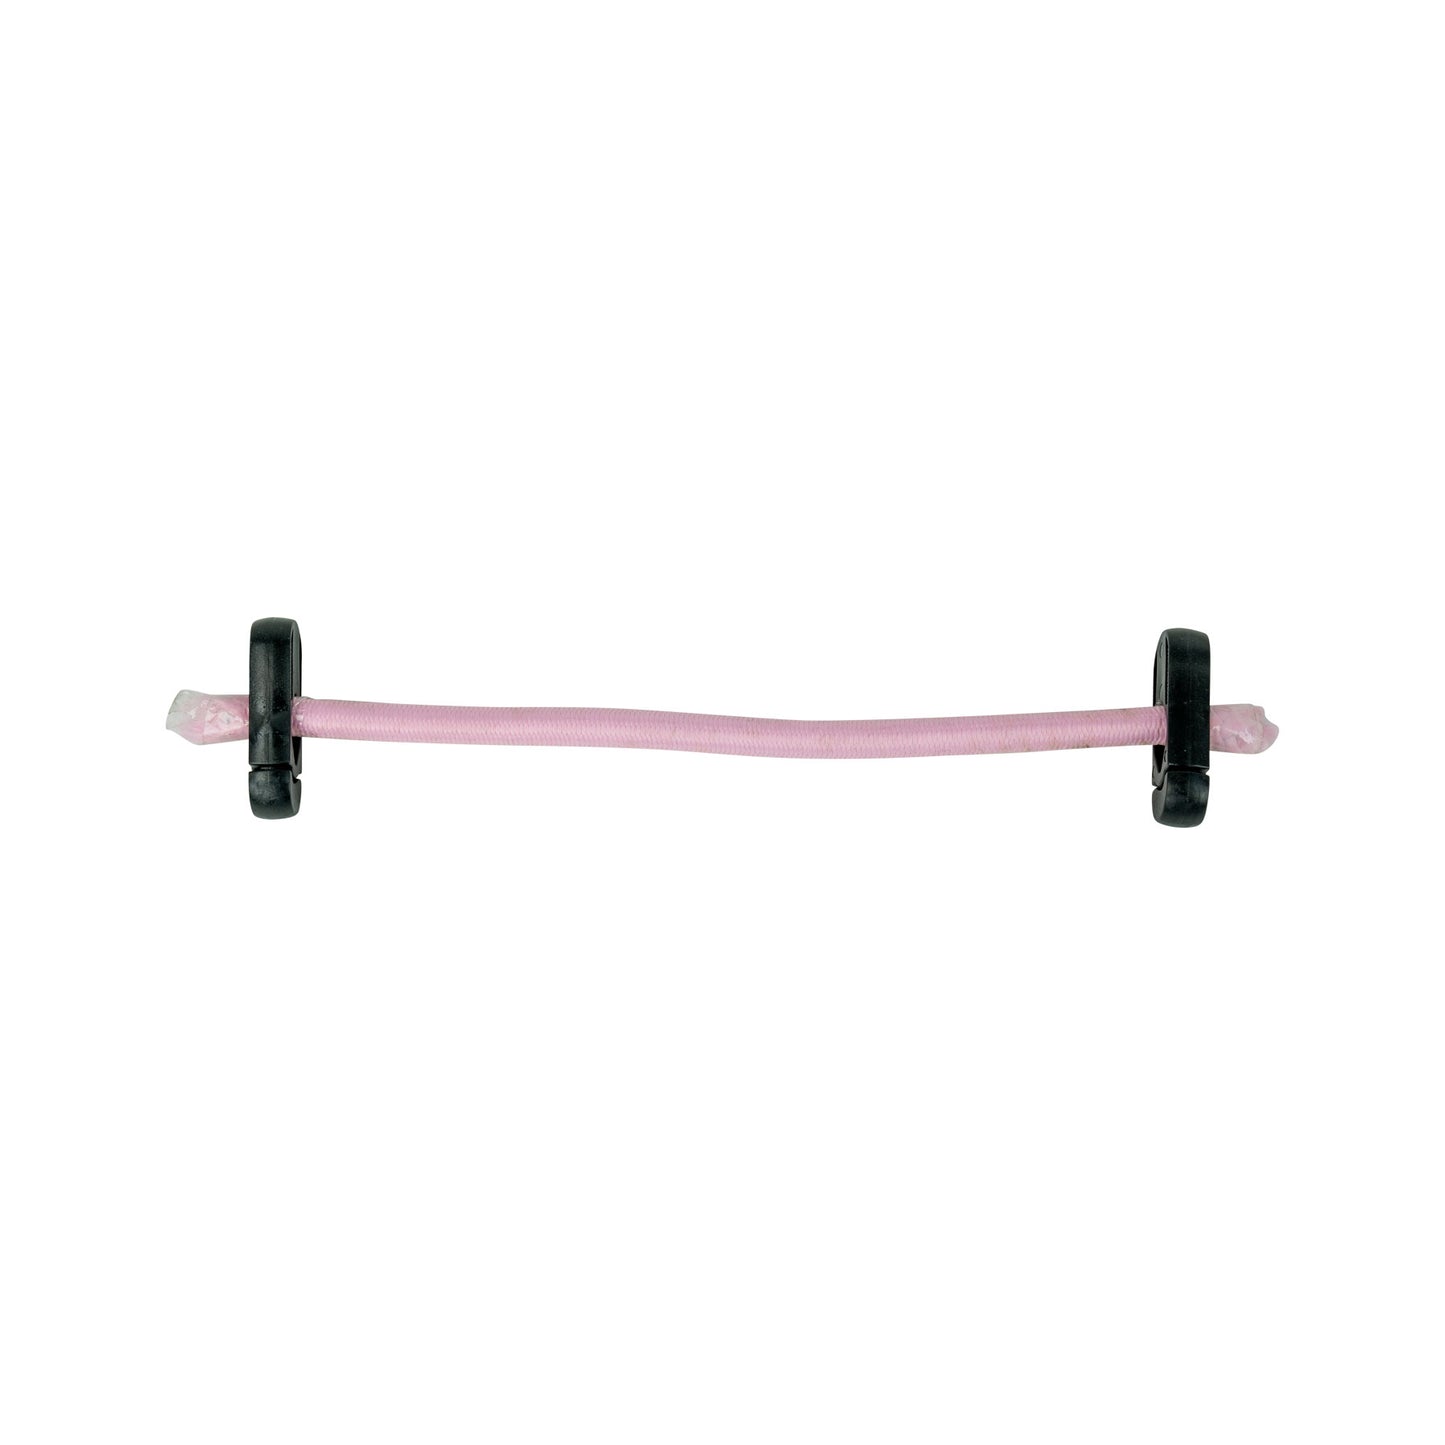 Pro Series Full Body Snow/Blue Goose Pink Bungees - 6 Bungees